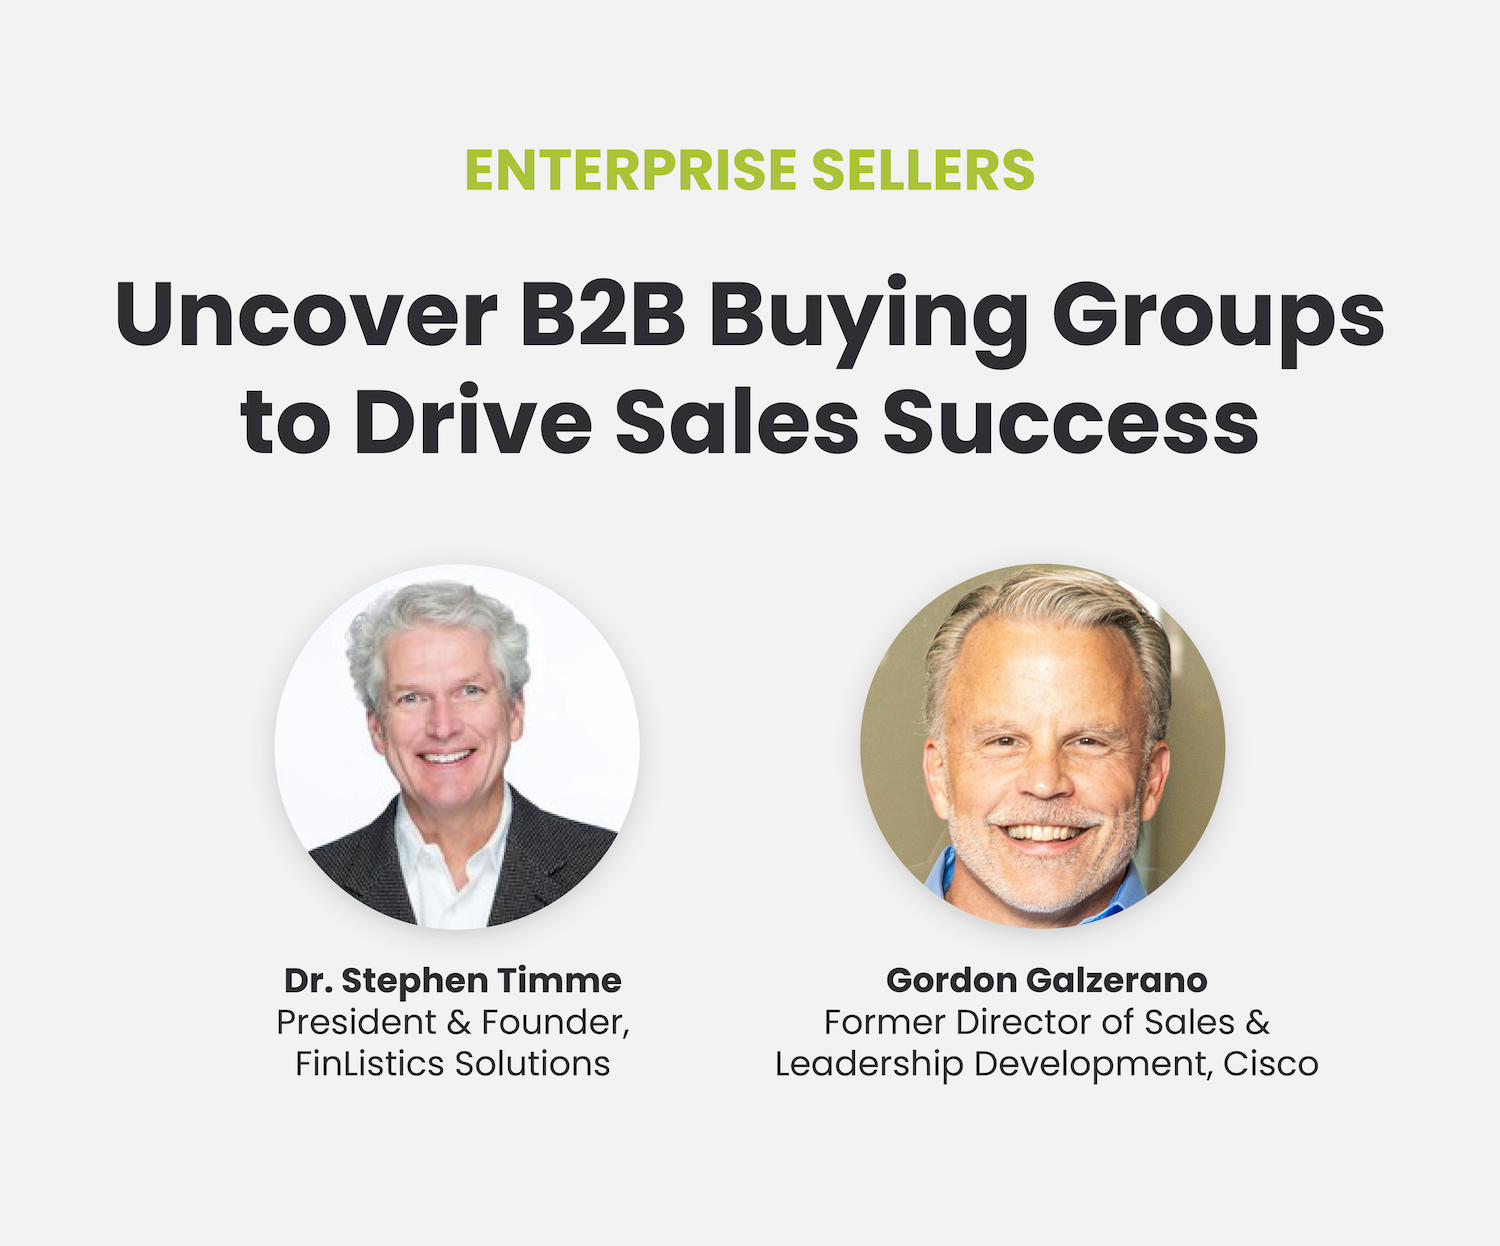 Uncover B2B Buying Groups to Drive Sales Success